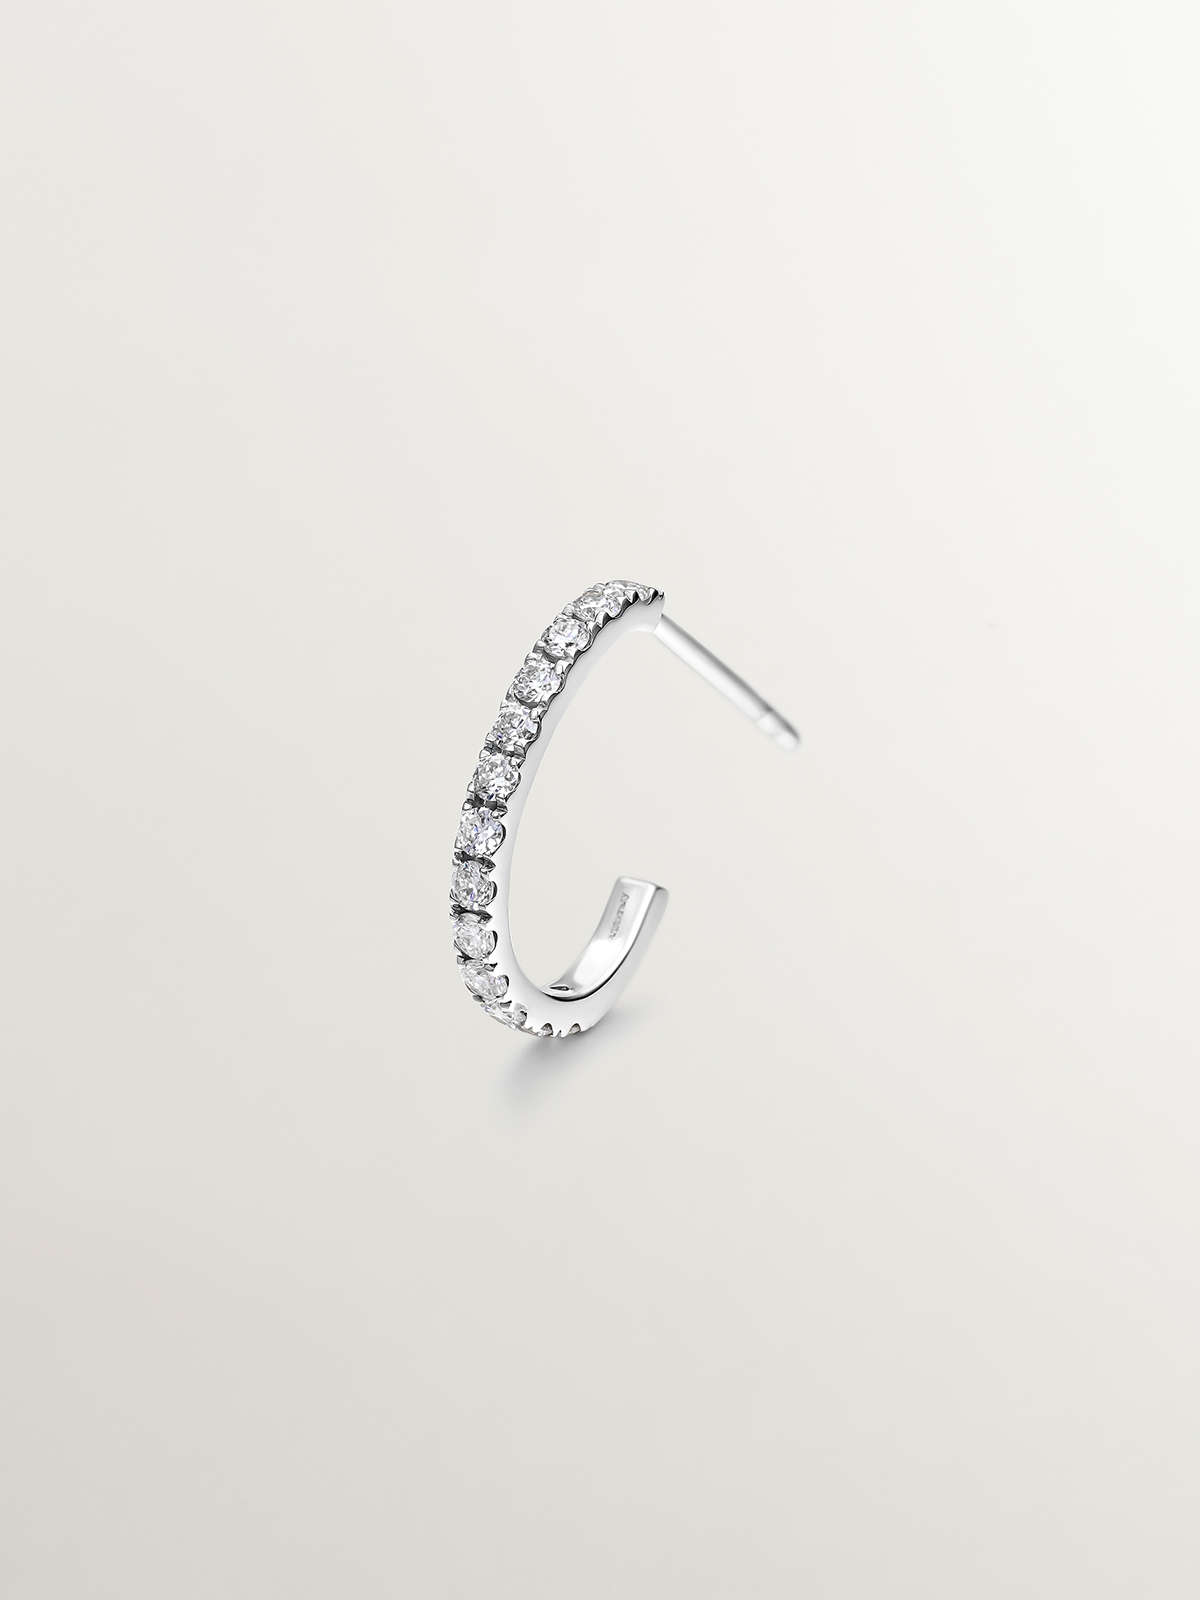 Individual small hoop earring made of 18K white gold with 0.20cts diamonds.